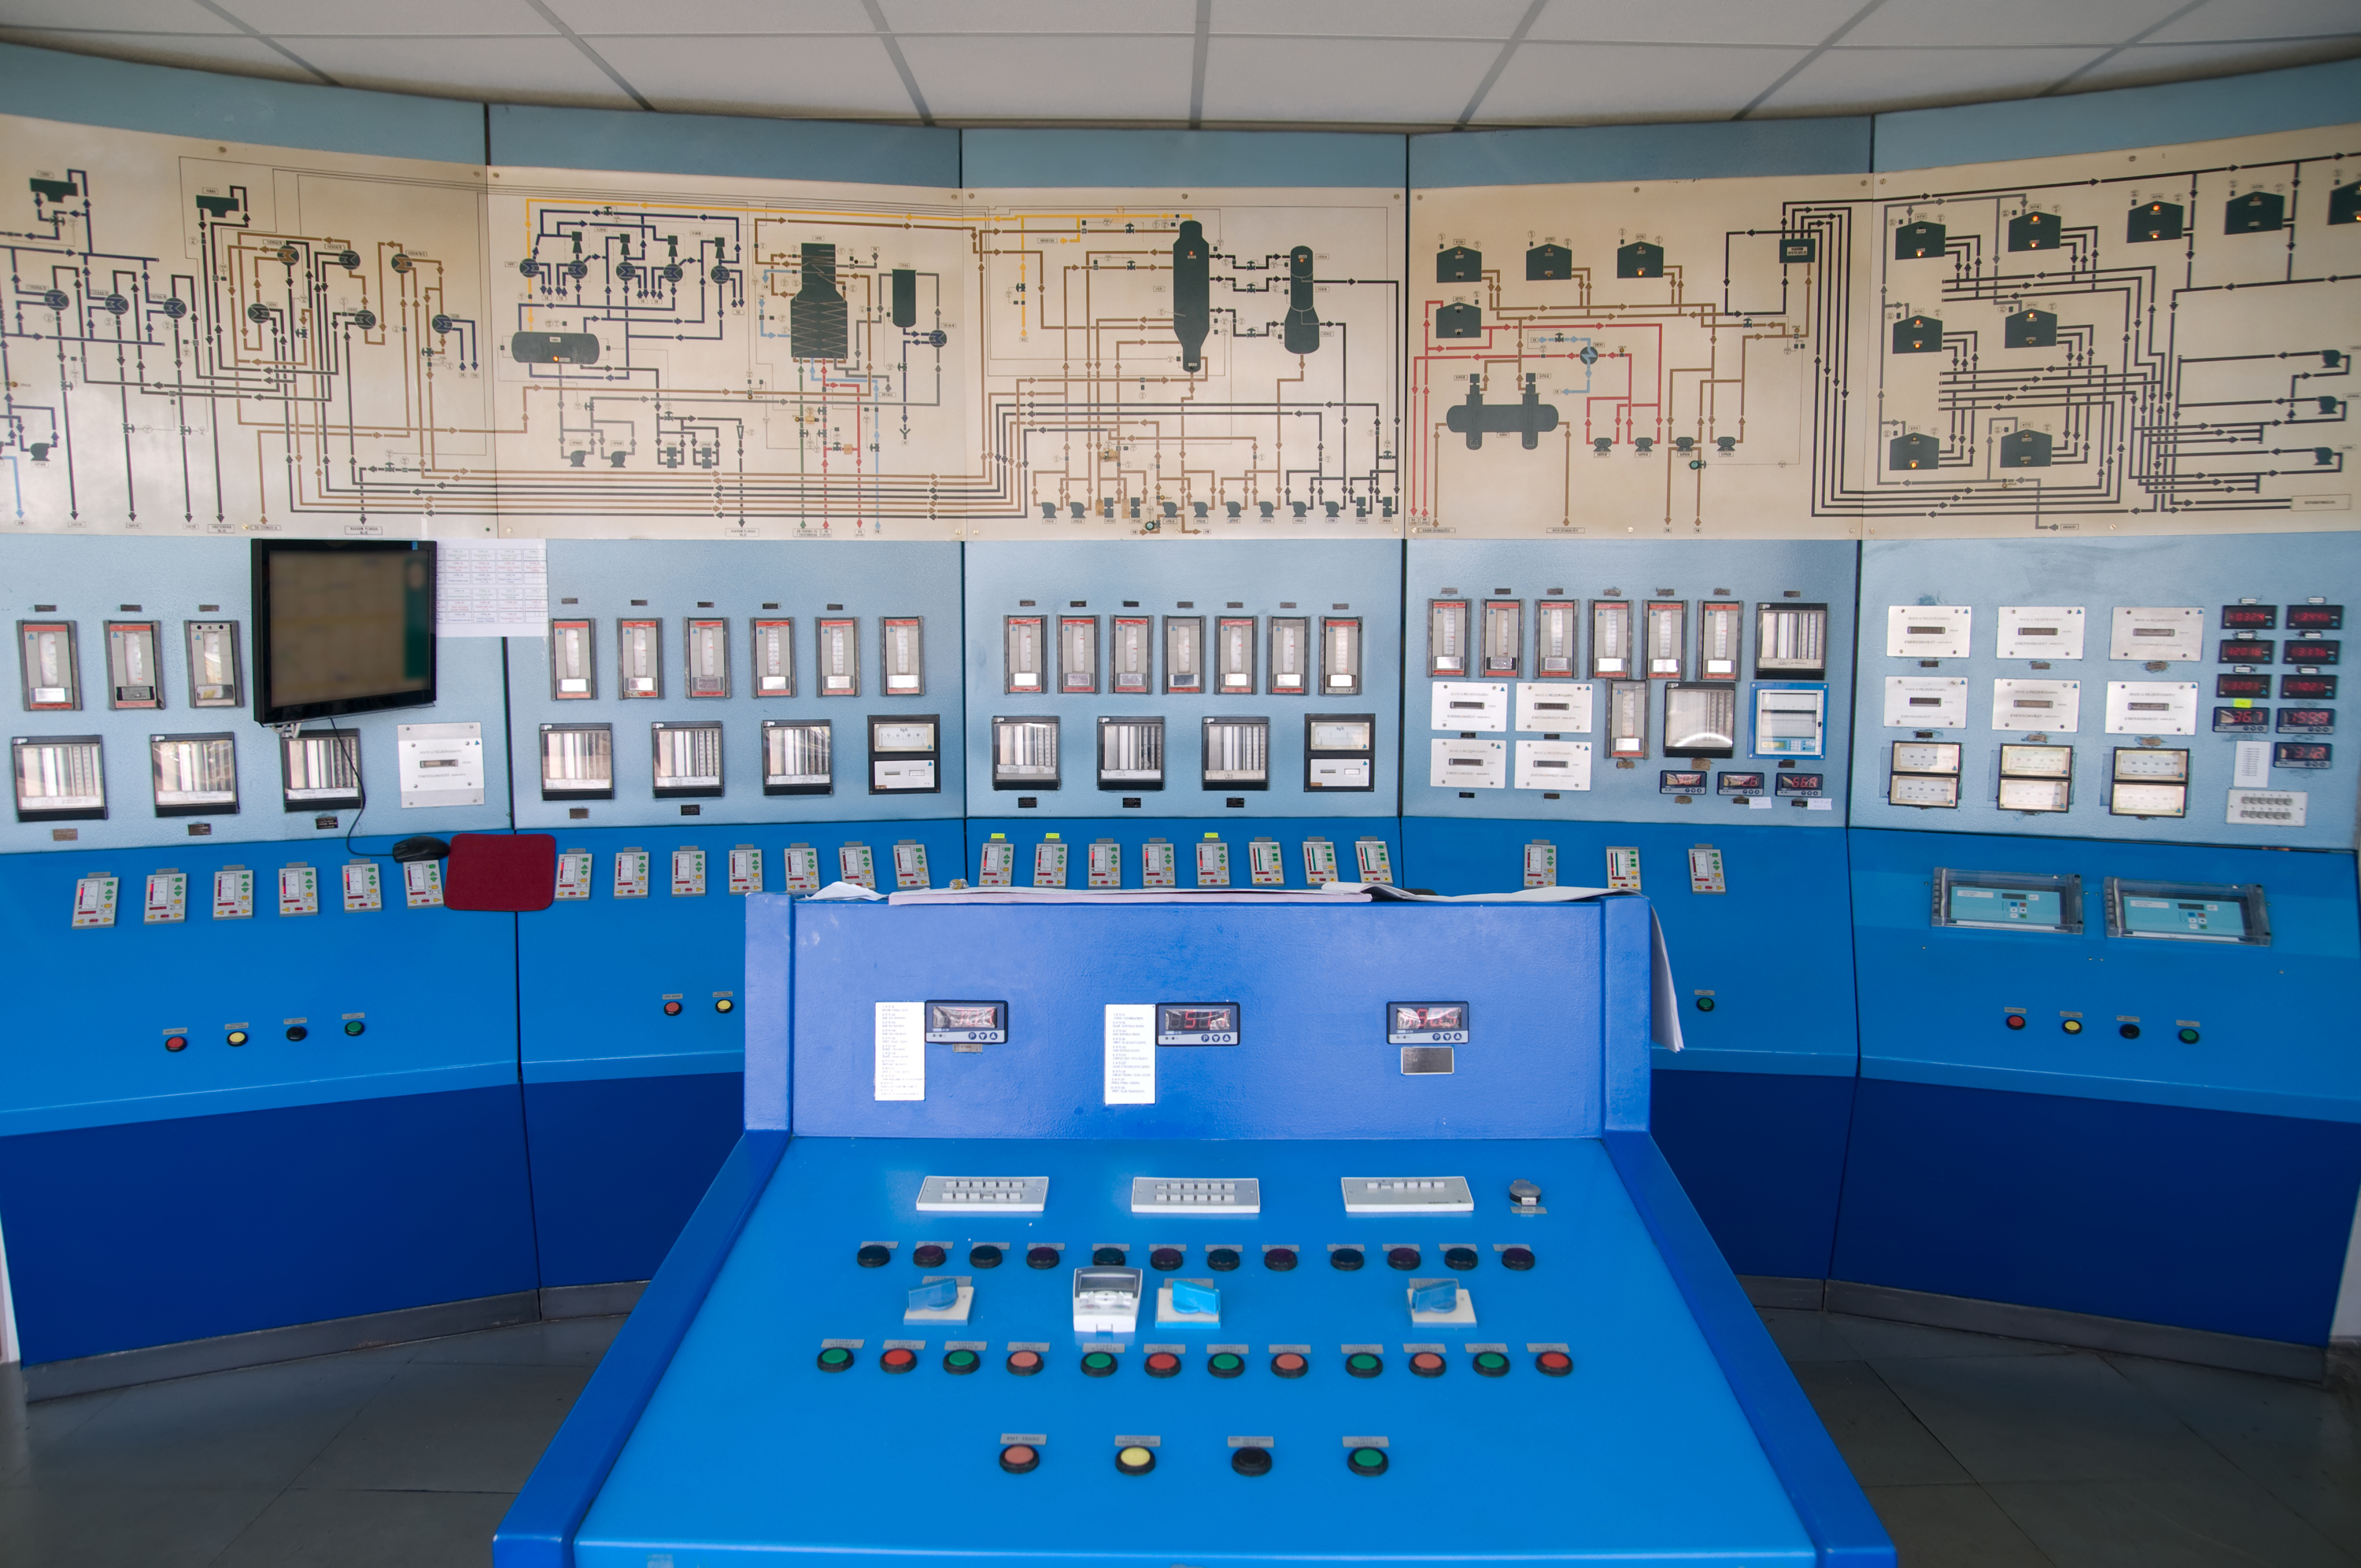 Fig 1 – “Traditional Industrial Control Room”